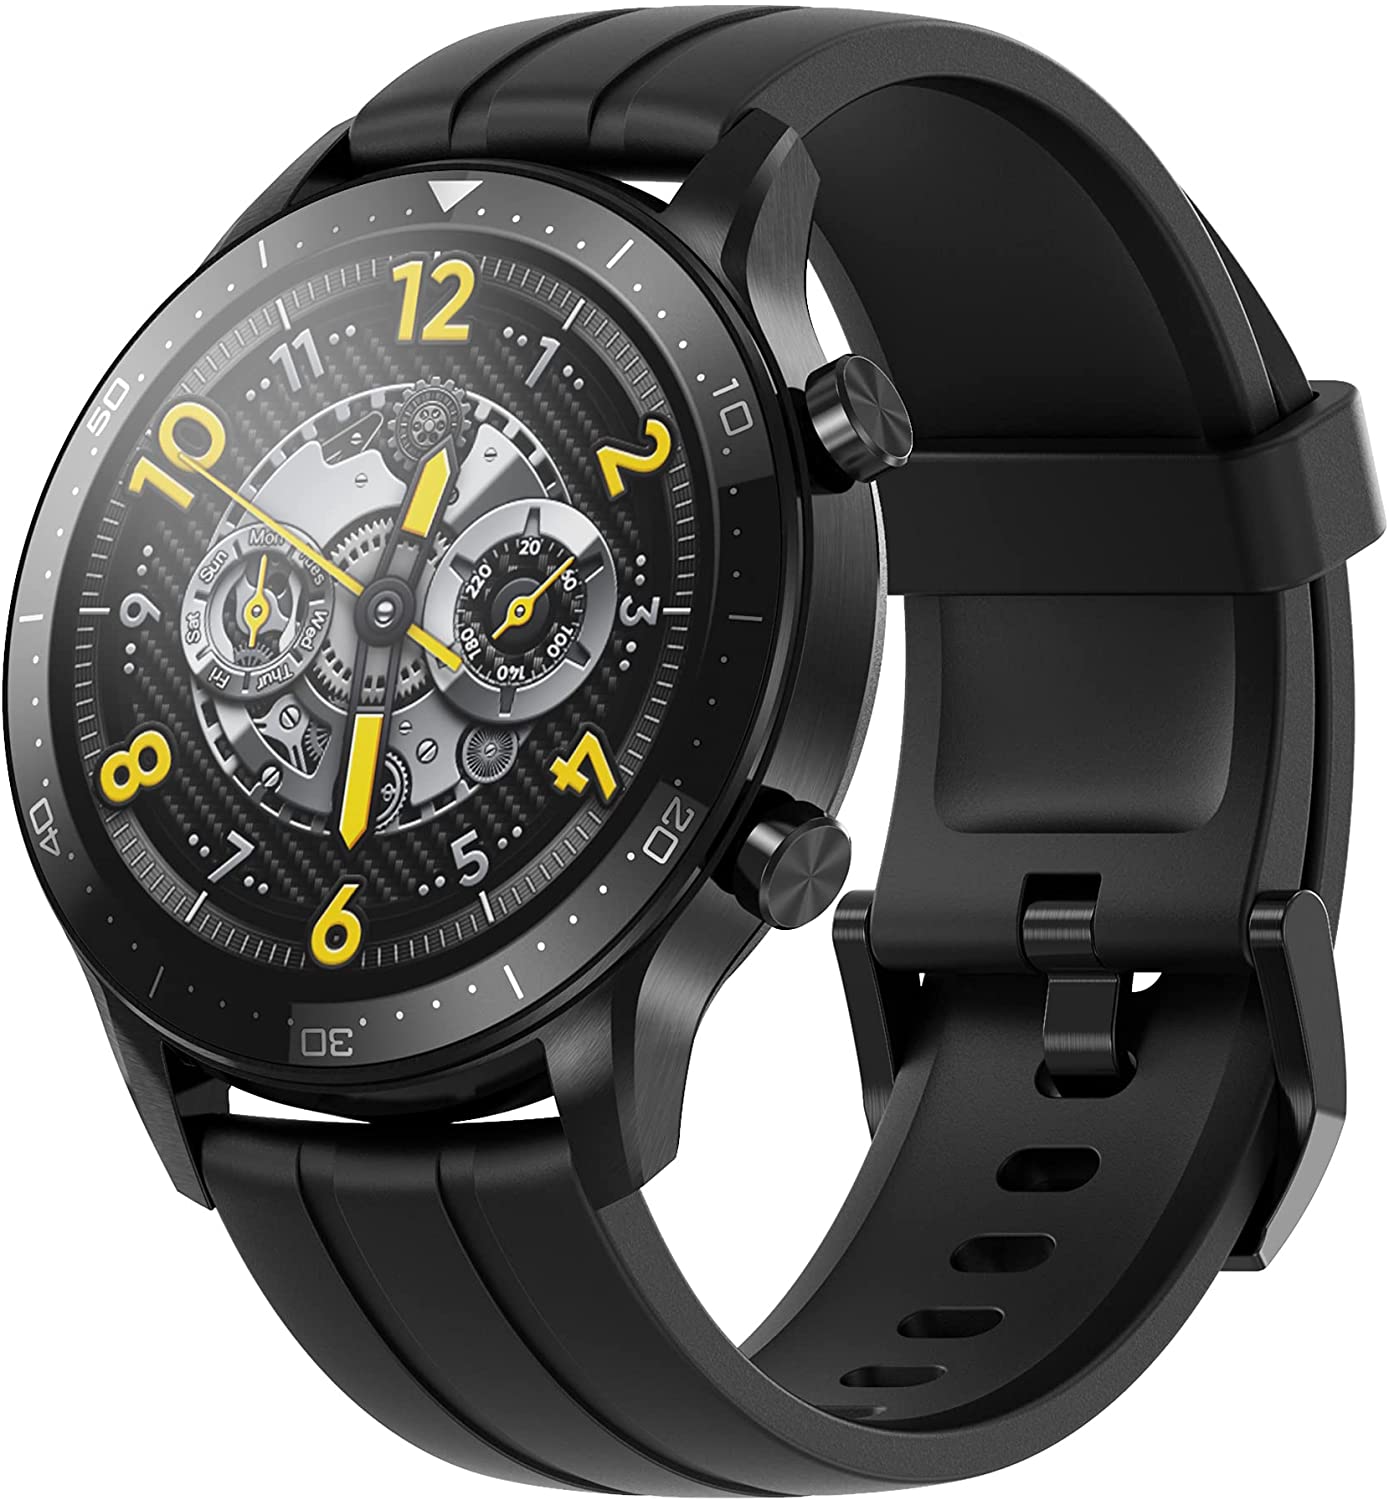 Realme Smart Watch S Pro with 1.39" AMOLED Touchscreen, 14 Days Battery Life, SpO2 & Heart Rate Monitoring, 5ATM Water Resistance